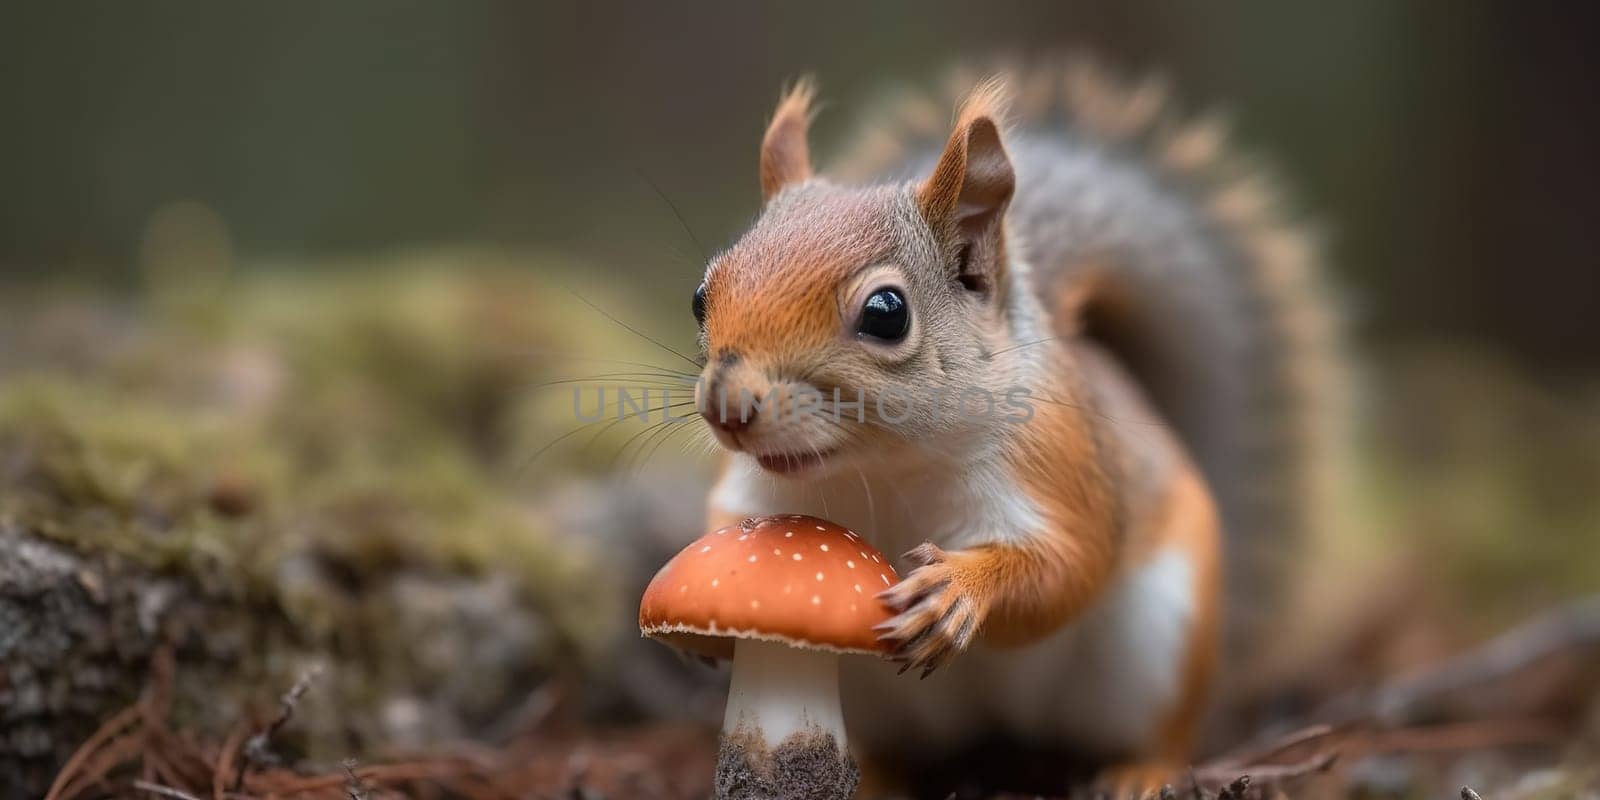 Cute Wild Squirrel With Mushroom In The Forest by tan4ikk1